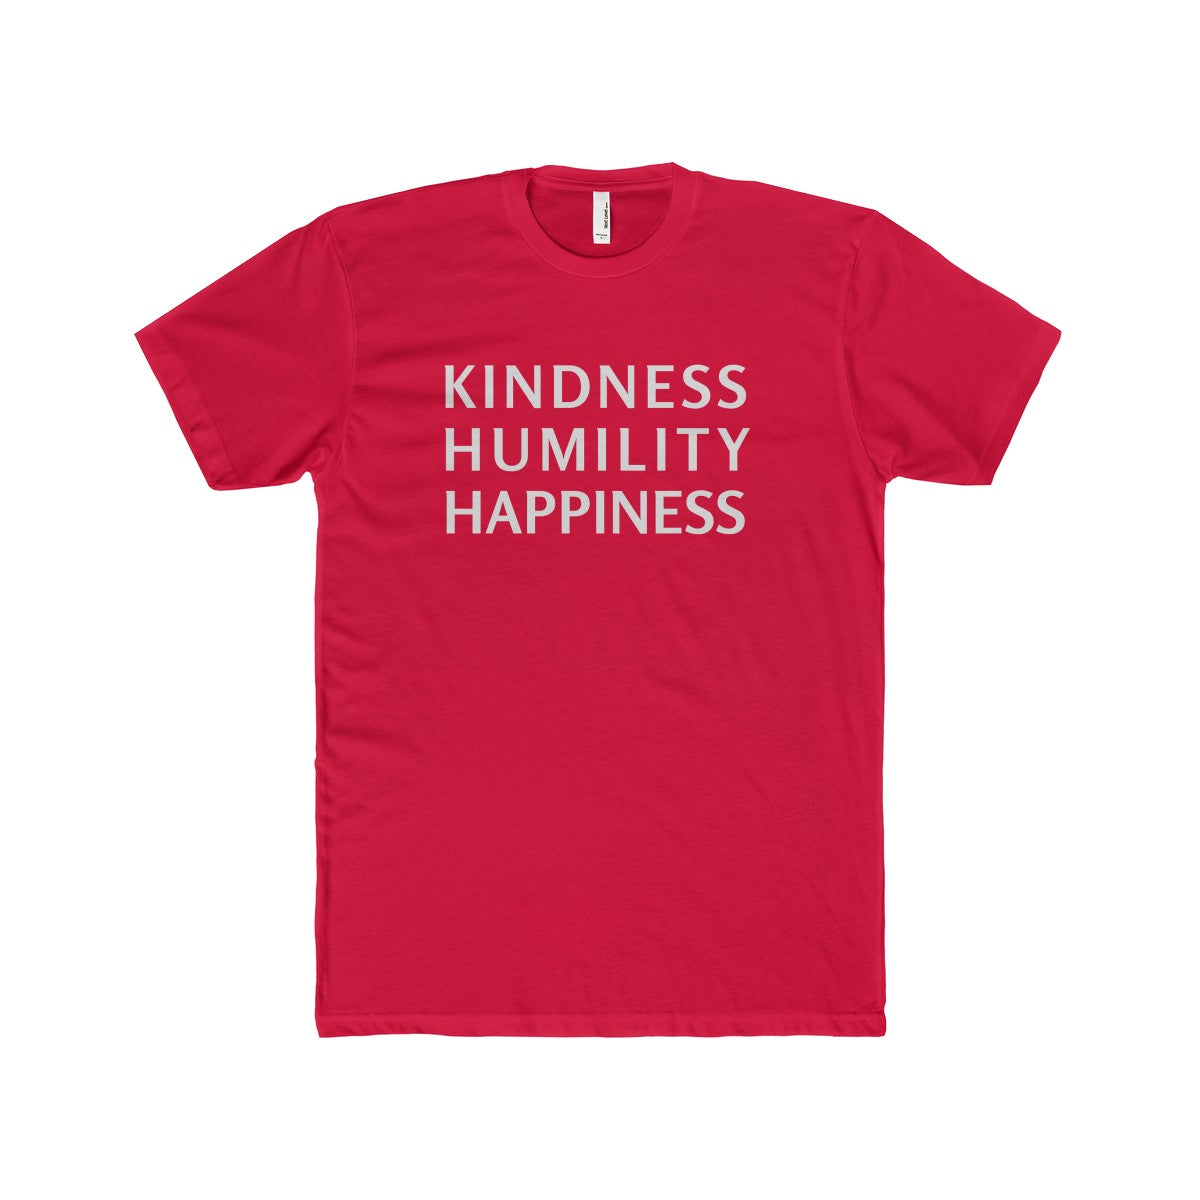 Kindness Humility Happiness | Fitted Tee, T-Shirt, SJ Corbyn